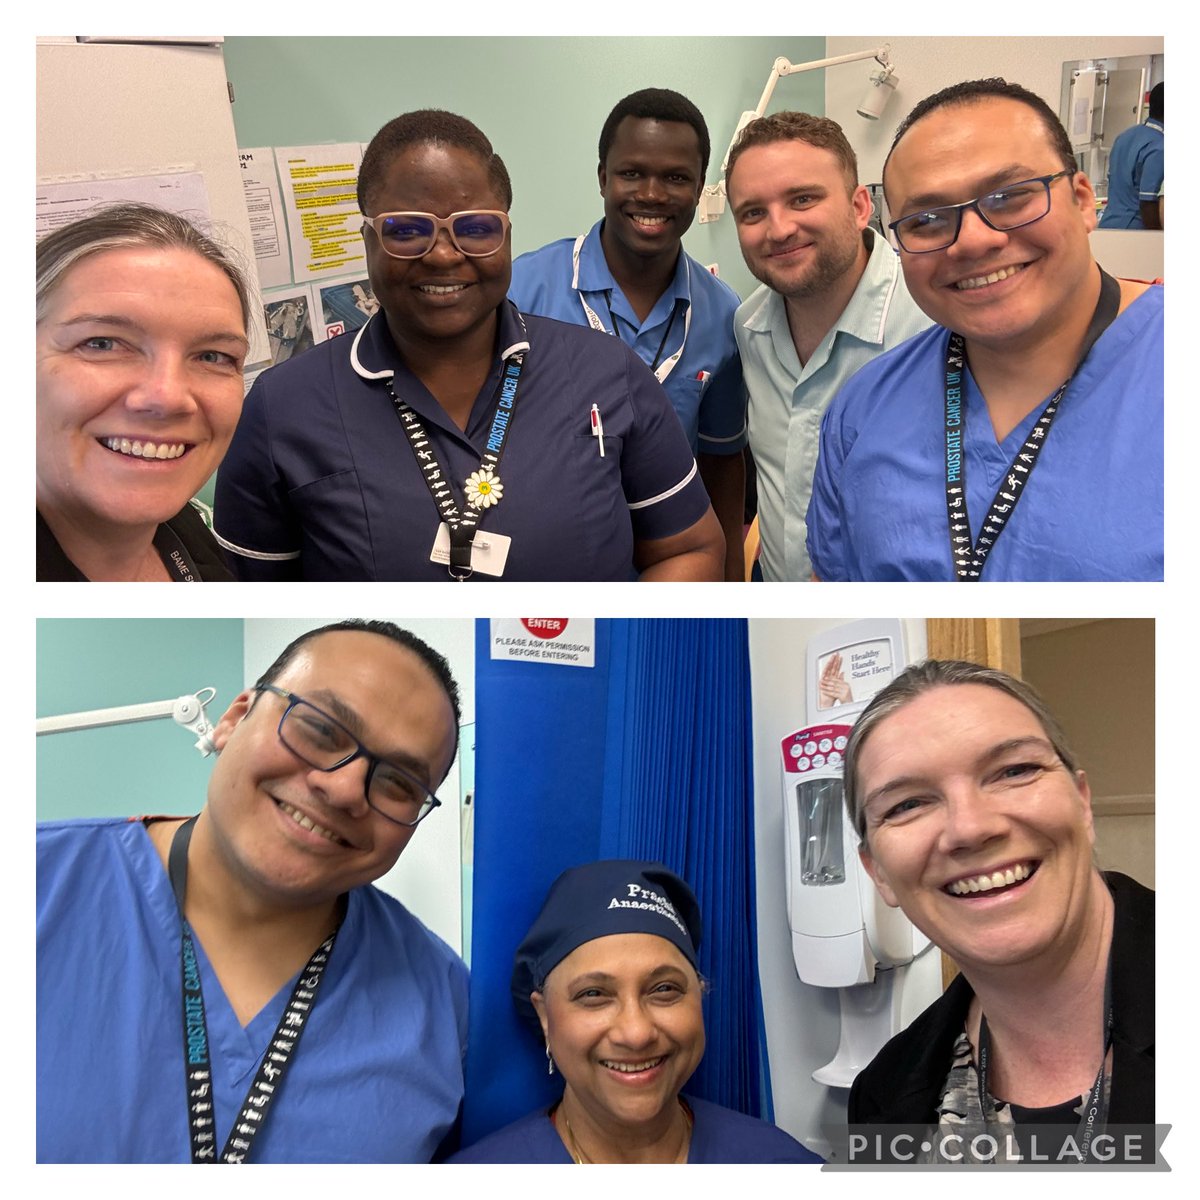 Brilliant #ConnectingWithCare today ⁦@HHFTnhs⁩ - meeting SAS anaesthetists and seeing the urology team in action. Great teamwork, teaching and learning and such compassionate care. Thank you!